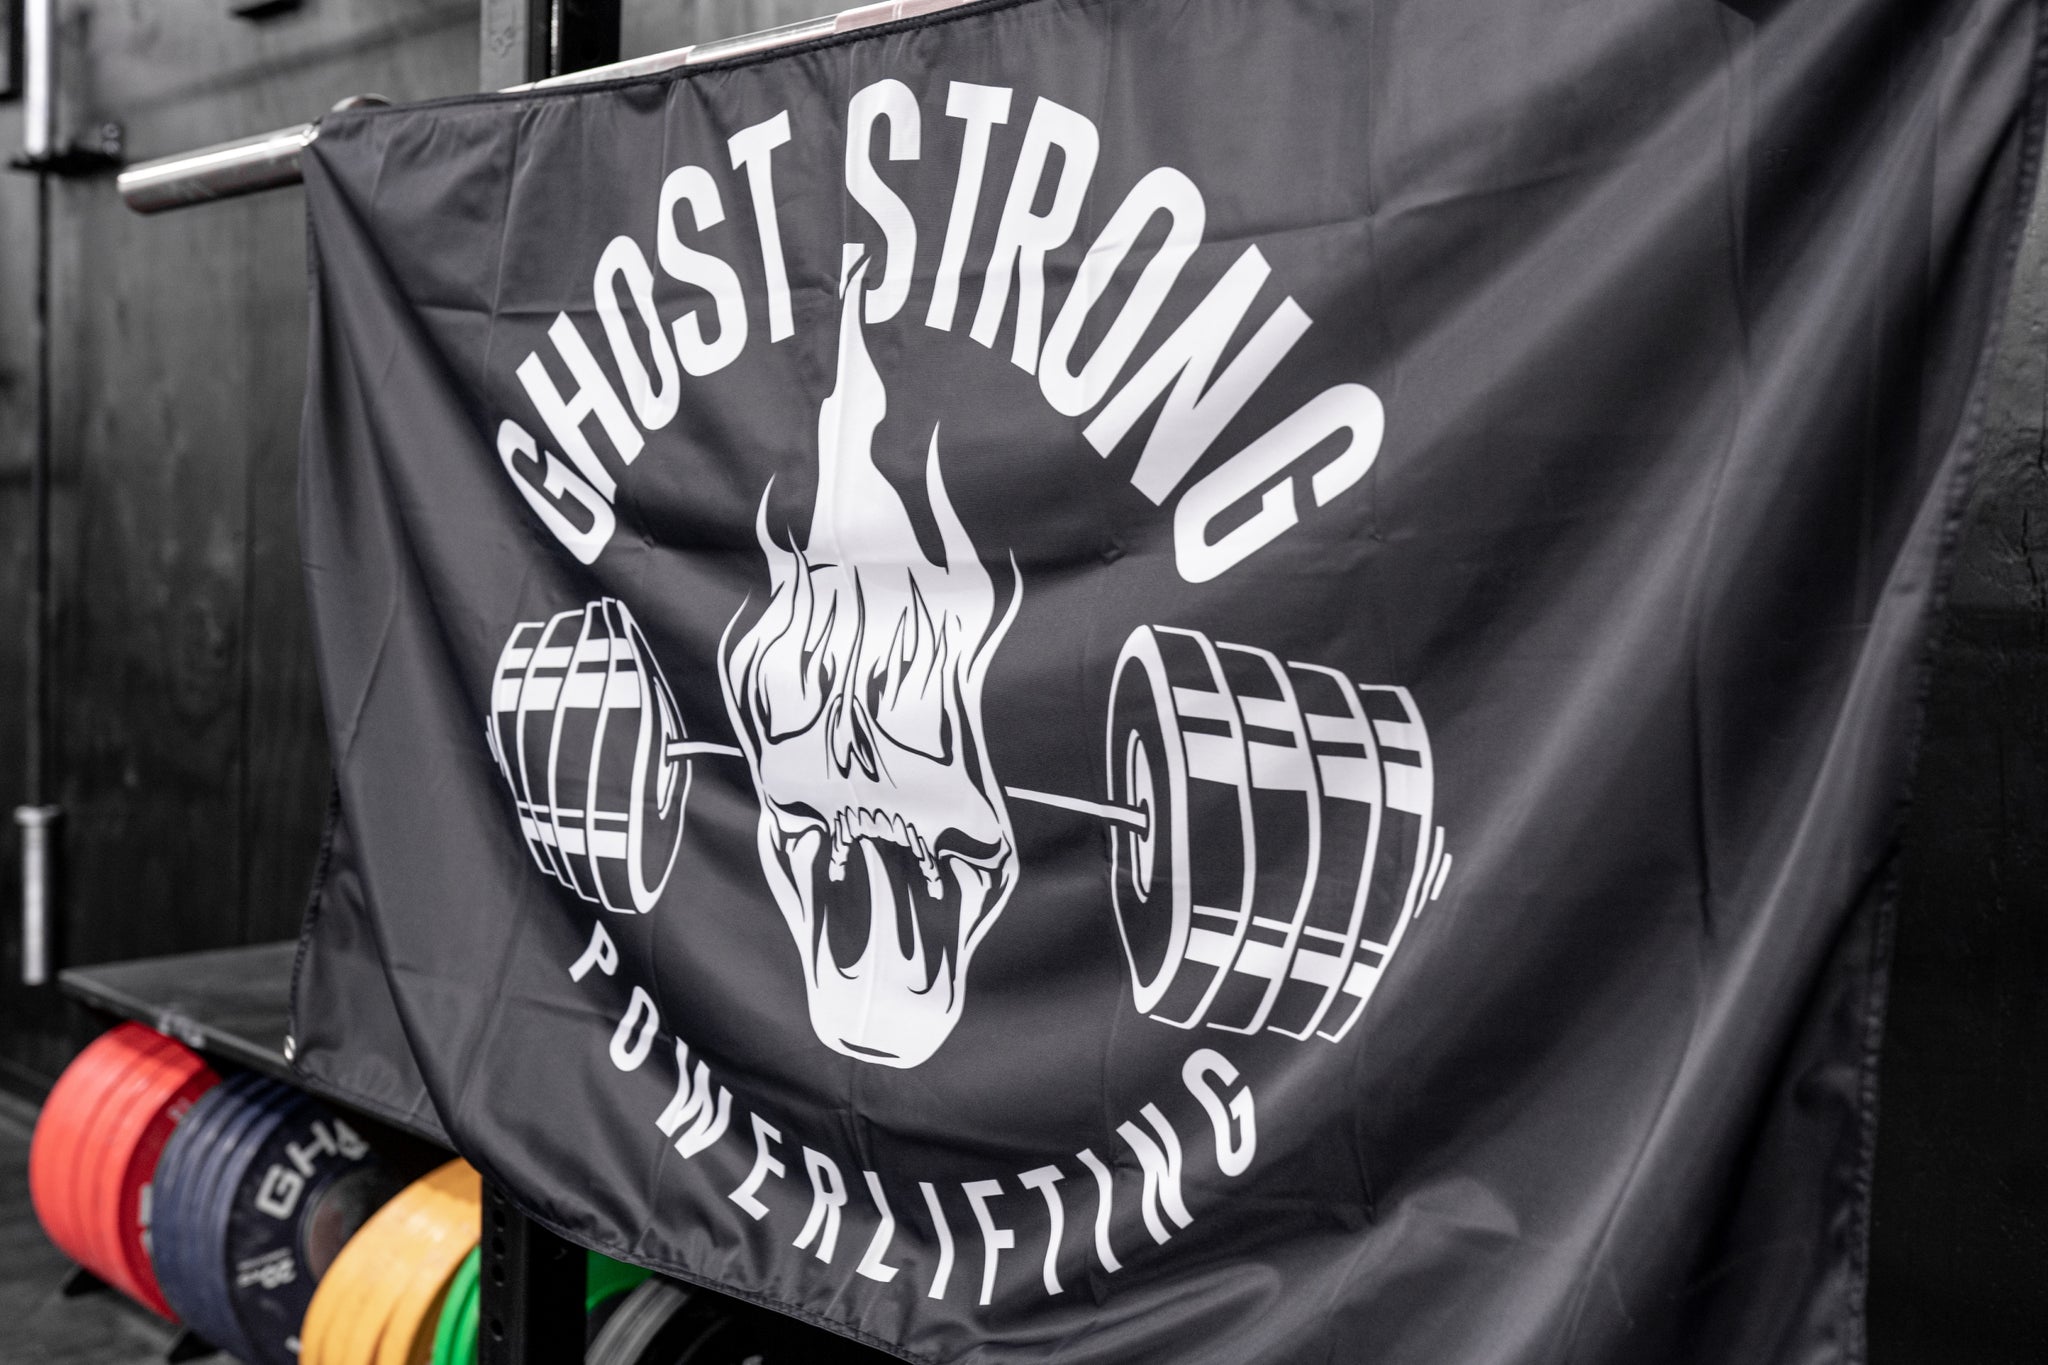 Ghost Strong Powerlifting Flag